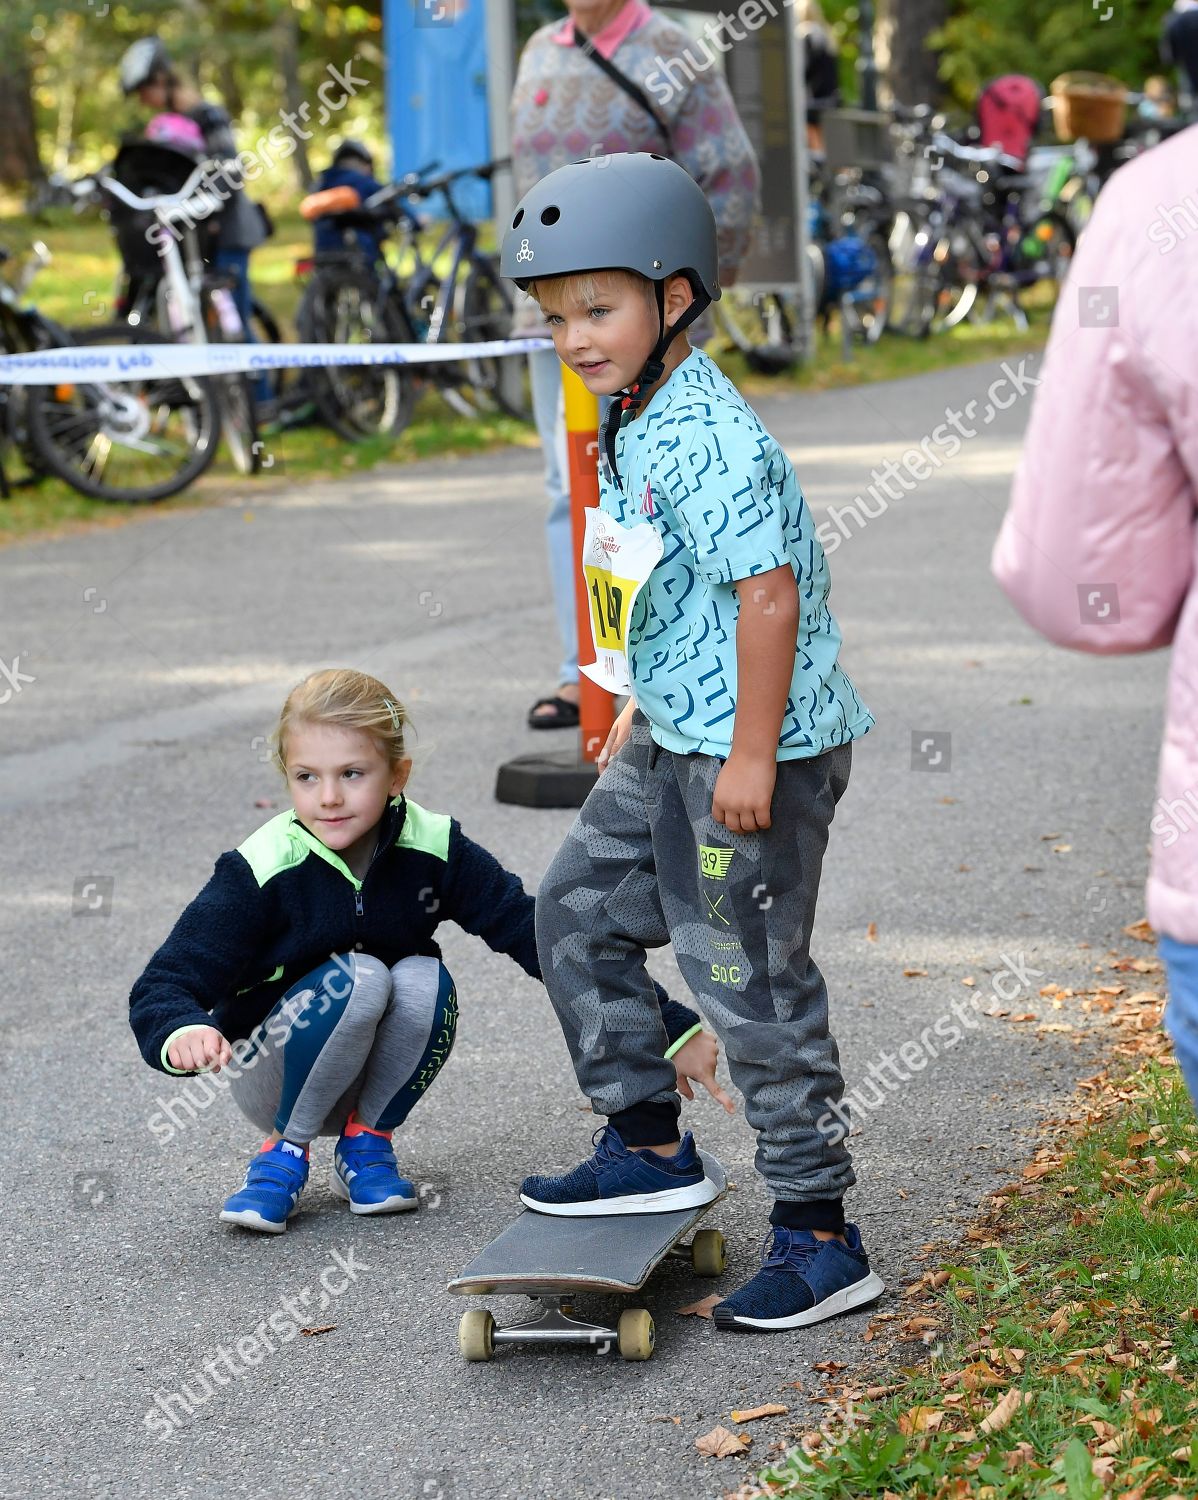 race-and-pep-day-stockholm-sweden-shutterstock-editorial-9884341ak.jpg